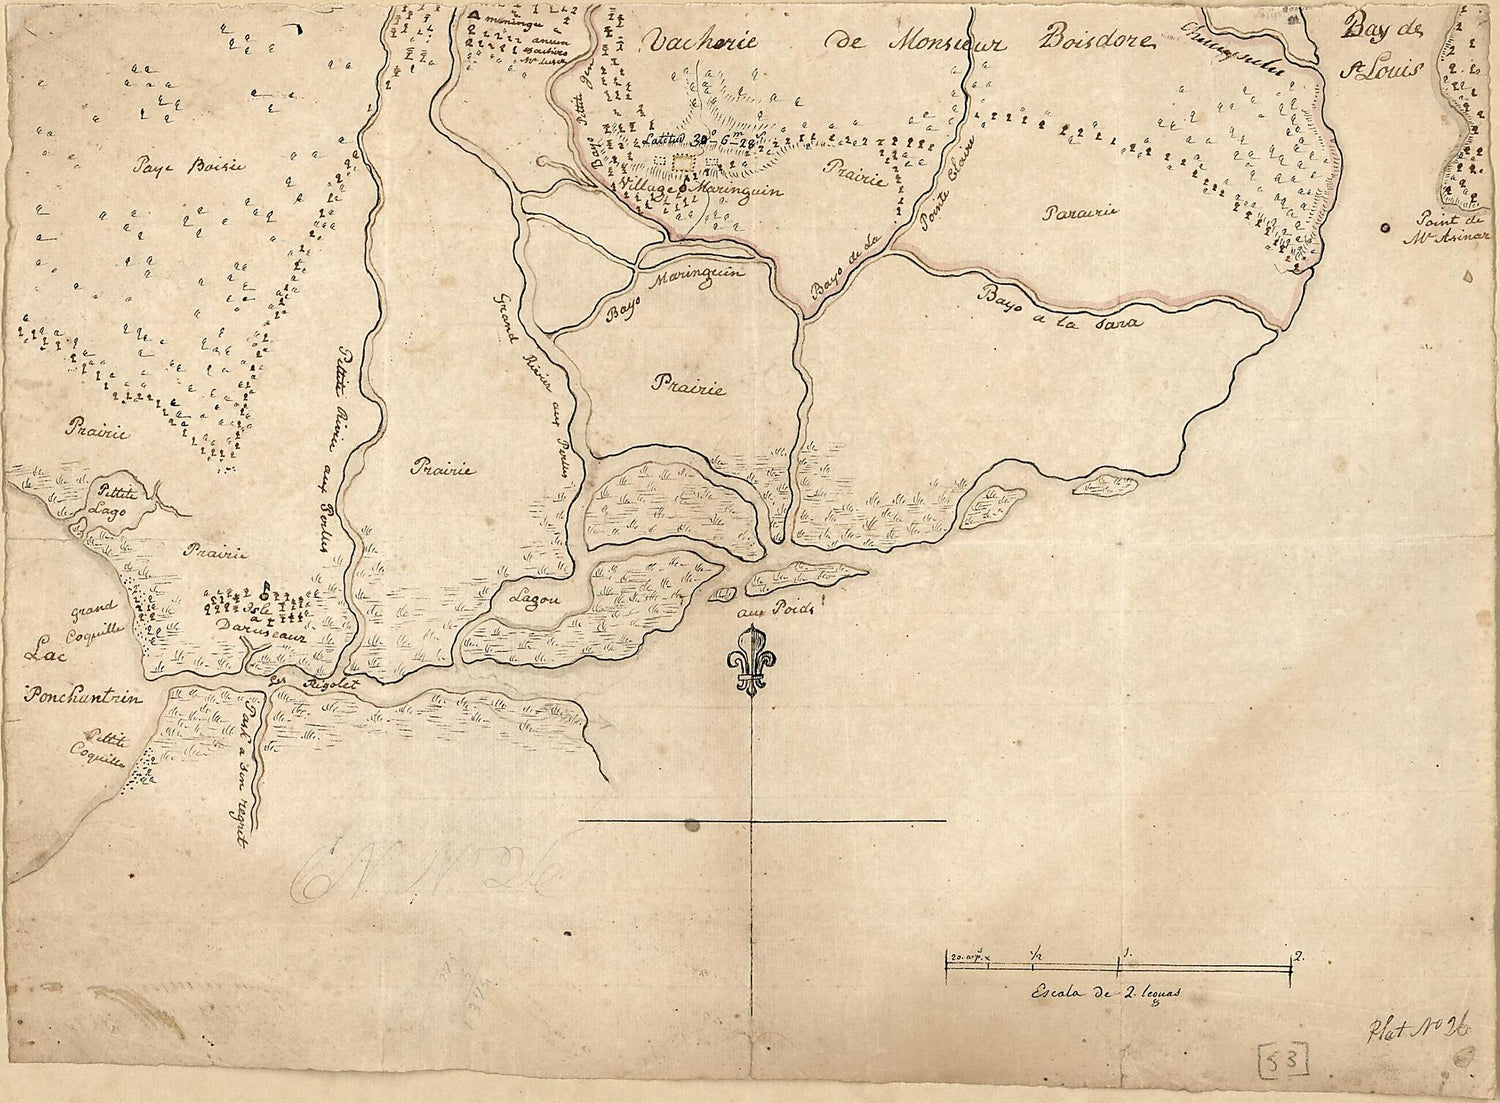 This old map of Map of the Rigolet and the Mouth of the Pearl River, Louisiana and Mississippi from 1800 was created by Vicente Sebastián Pintado in 1800